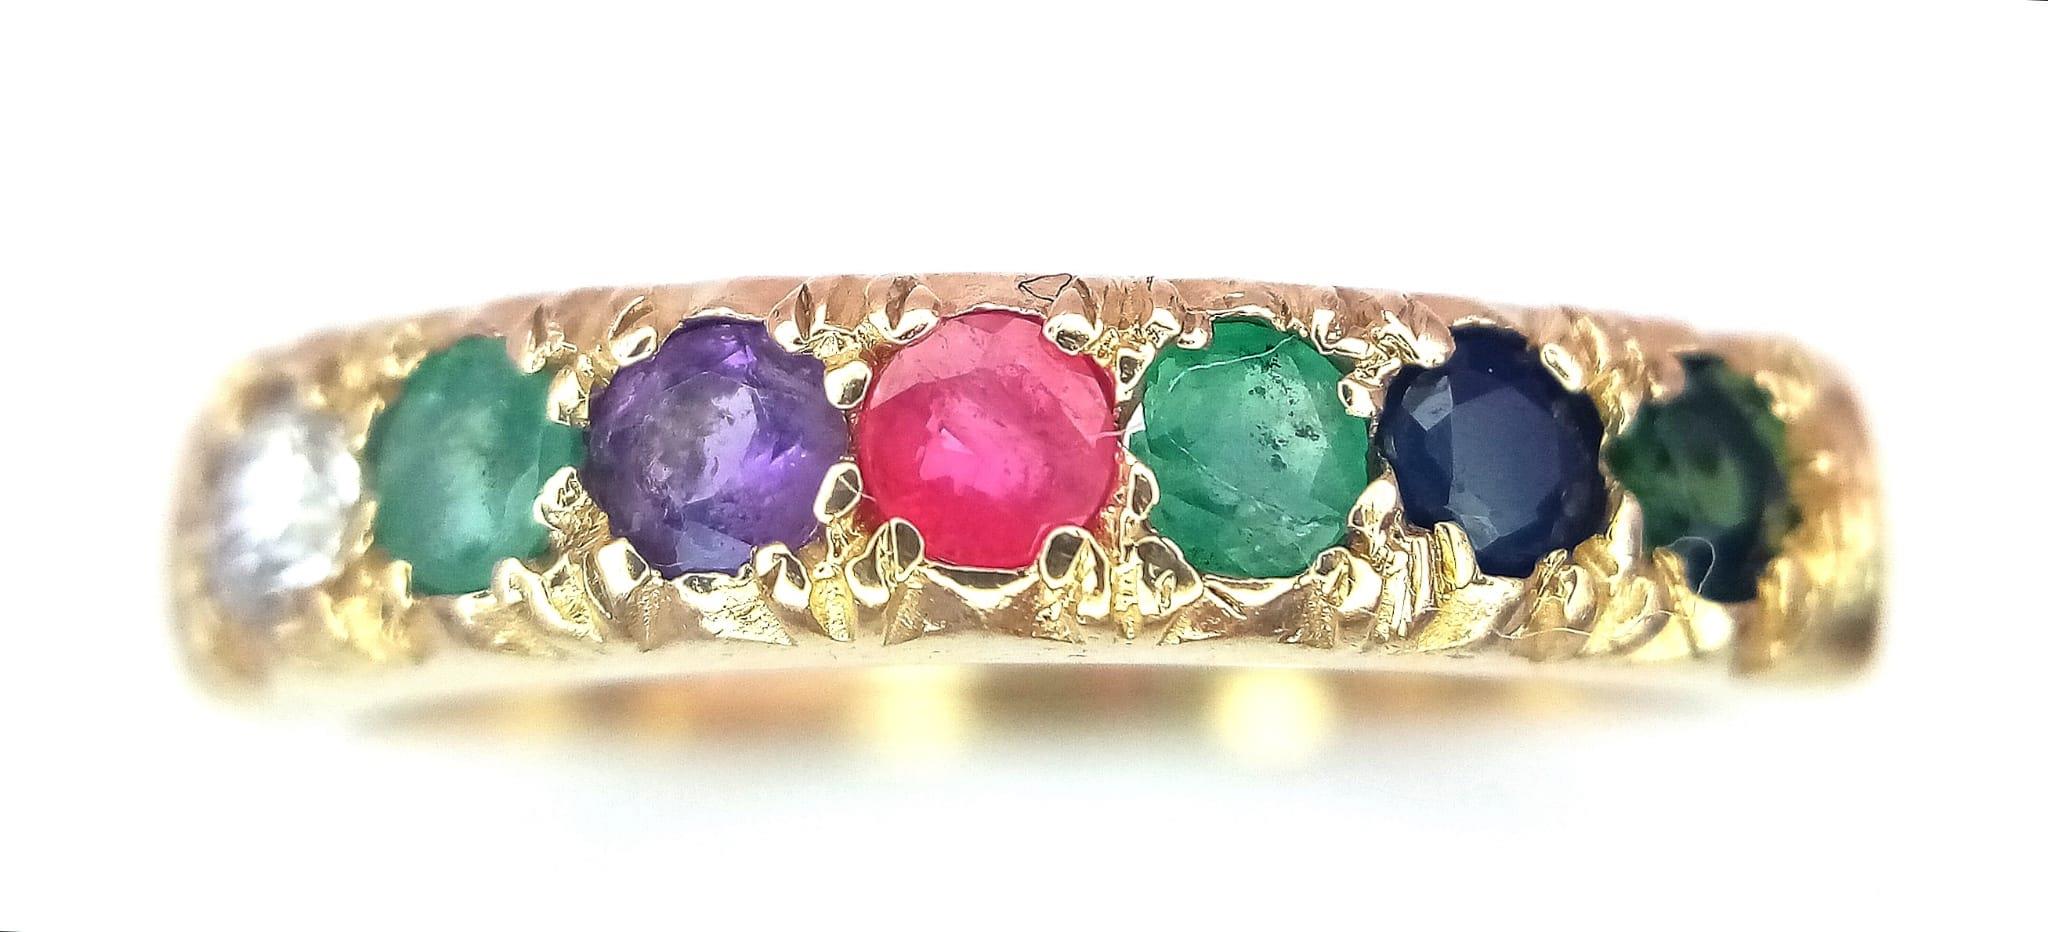 A PRETTY 9K YELLOW GOLD MULTI GEMSTONES SET DEAREST RING, WEIGHT 2.9G SIZE S - Image 5 of 11